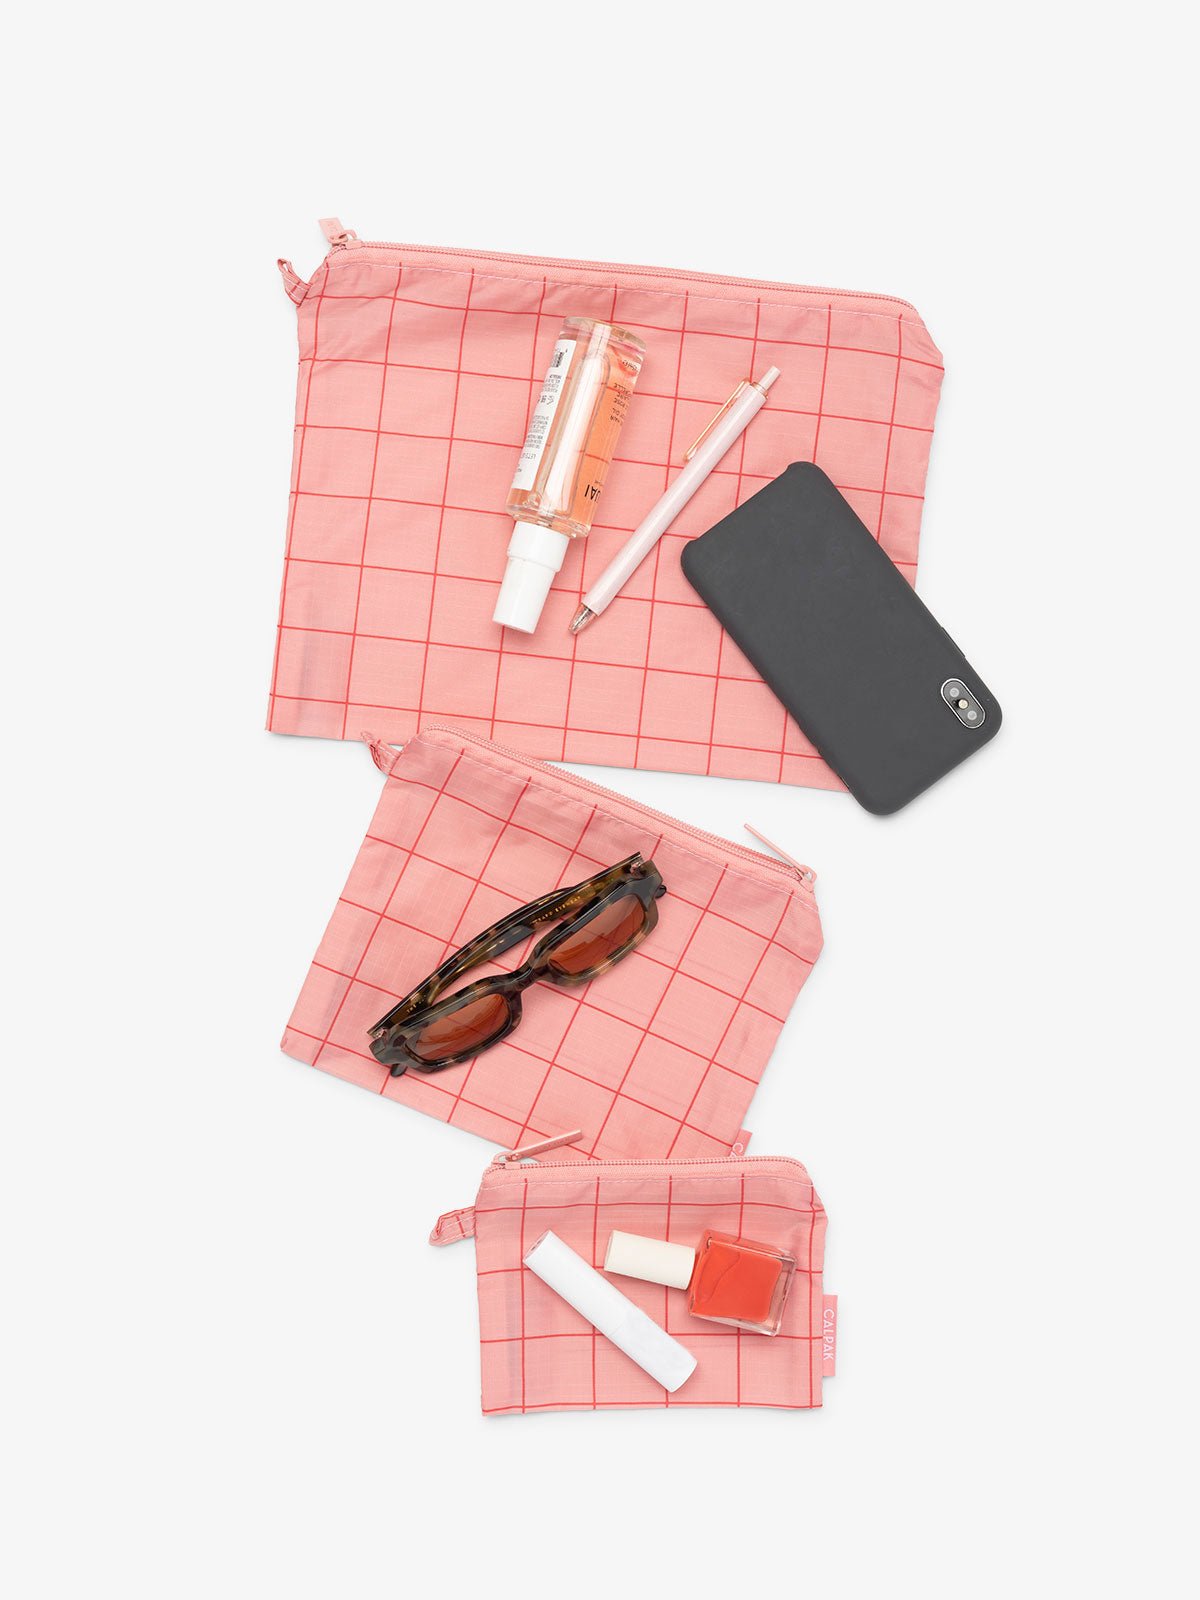 CALPAK Compakt 3 piece zippered pouch set in 3 sizes with water resistant material in pink grid